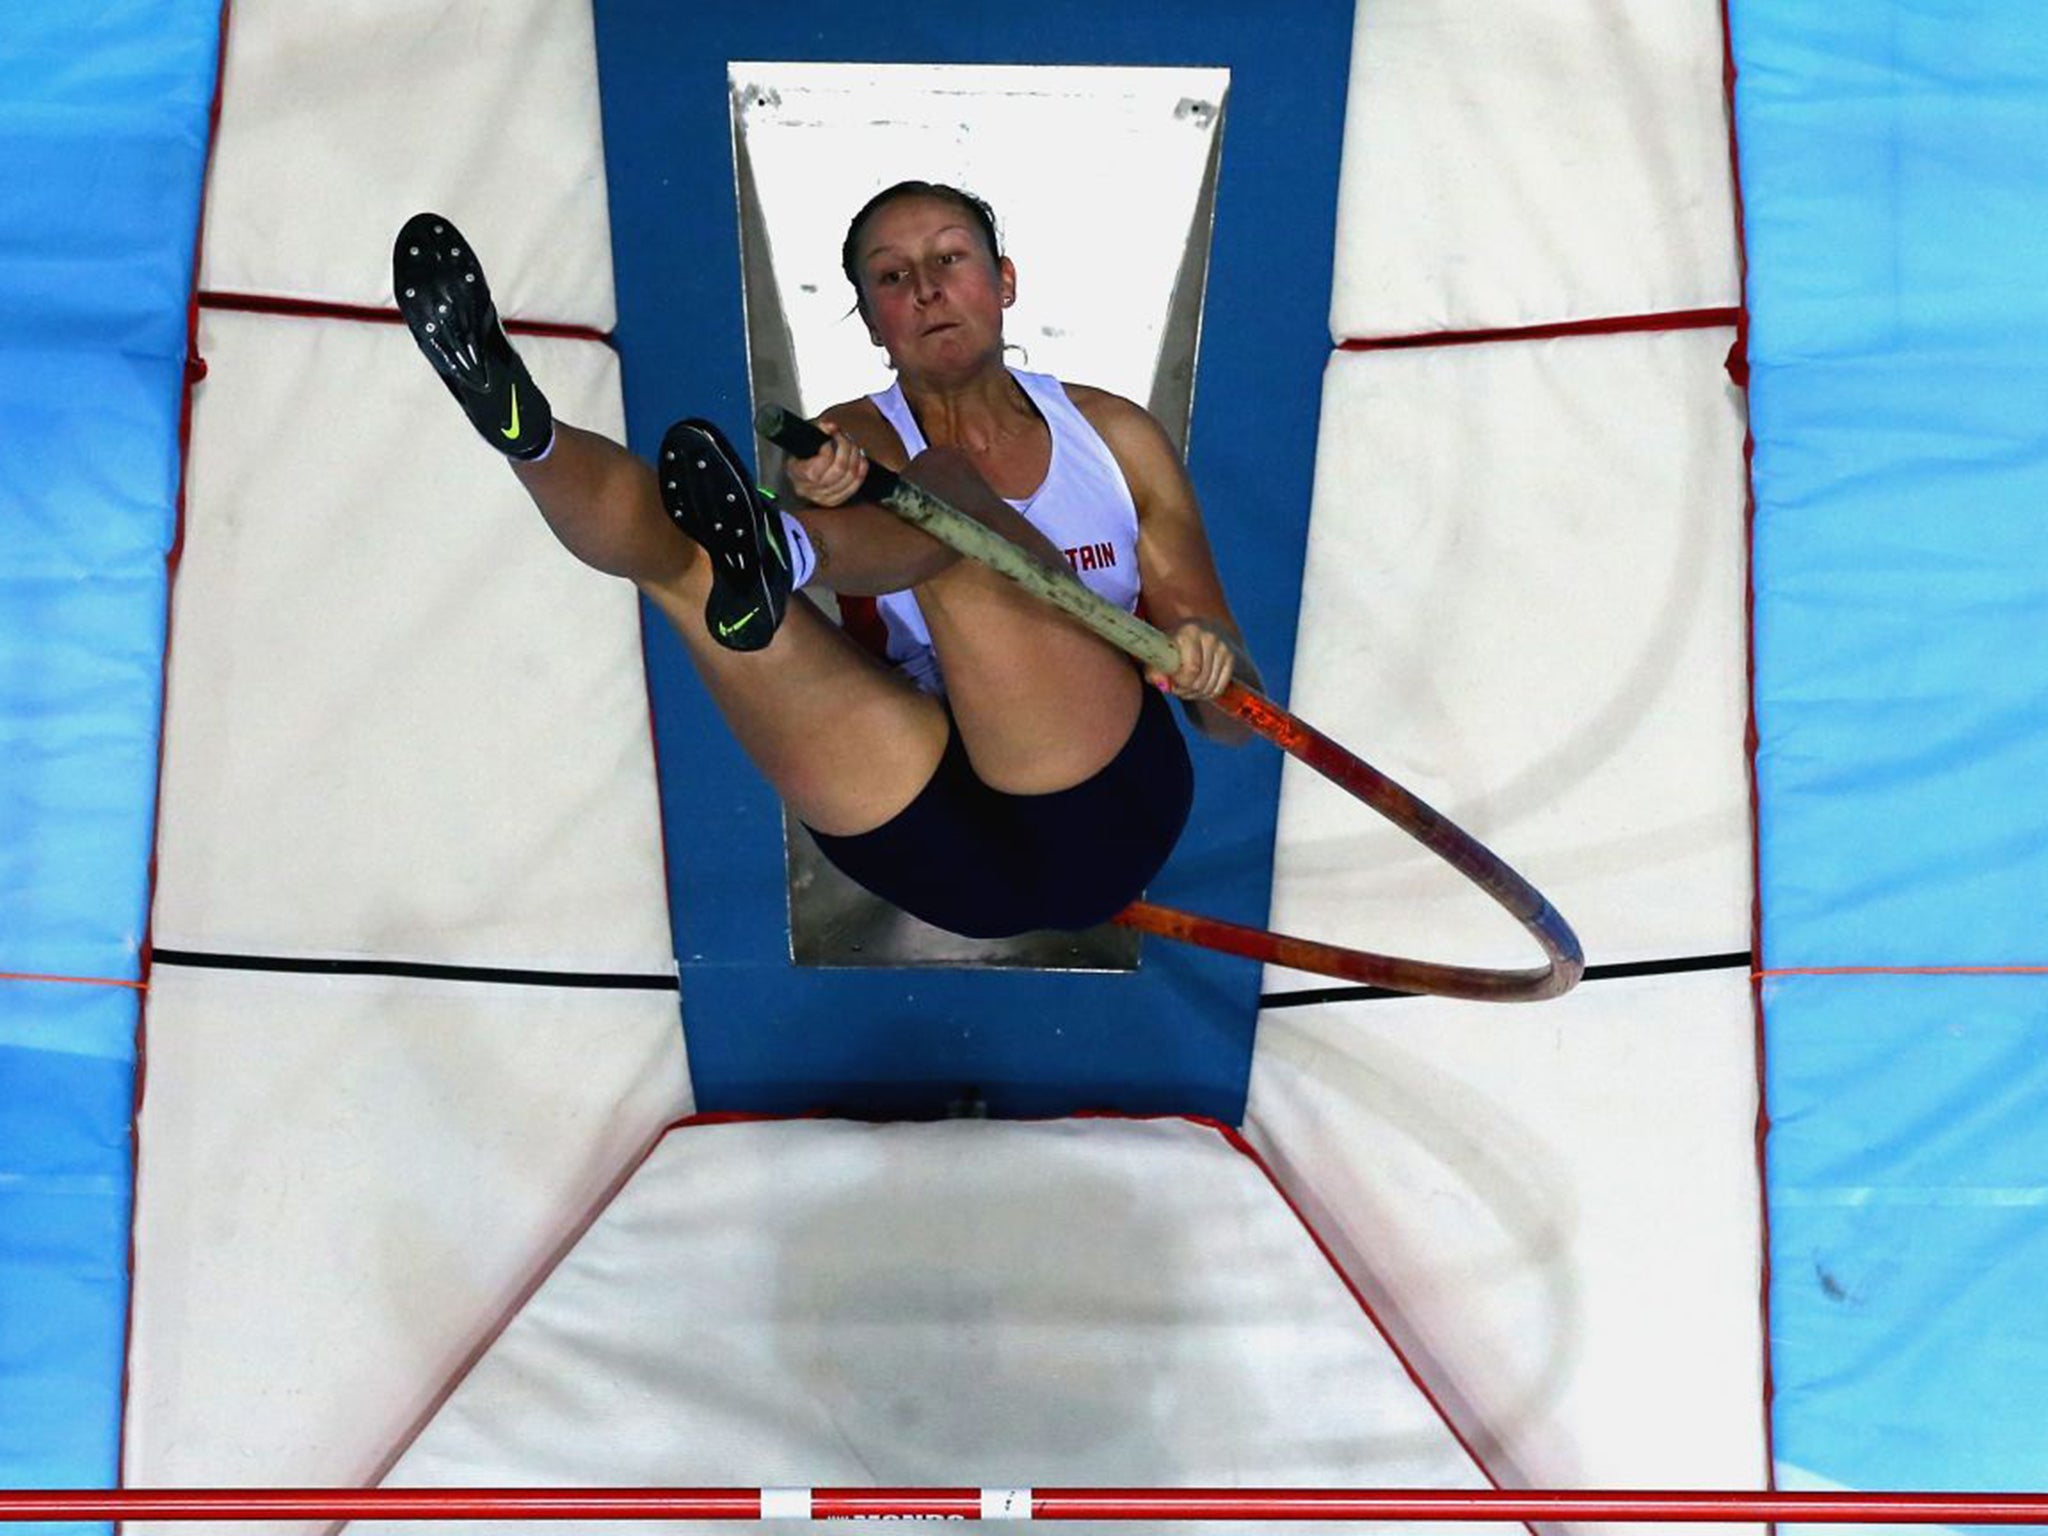 Holly Bradshaw, then Bleasdale, competing in the World Indoor Championship pole vault last year